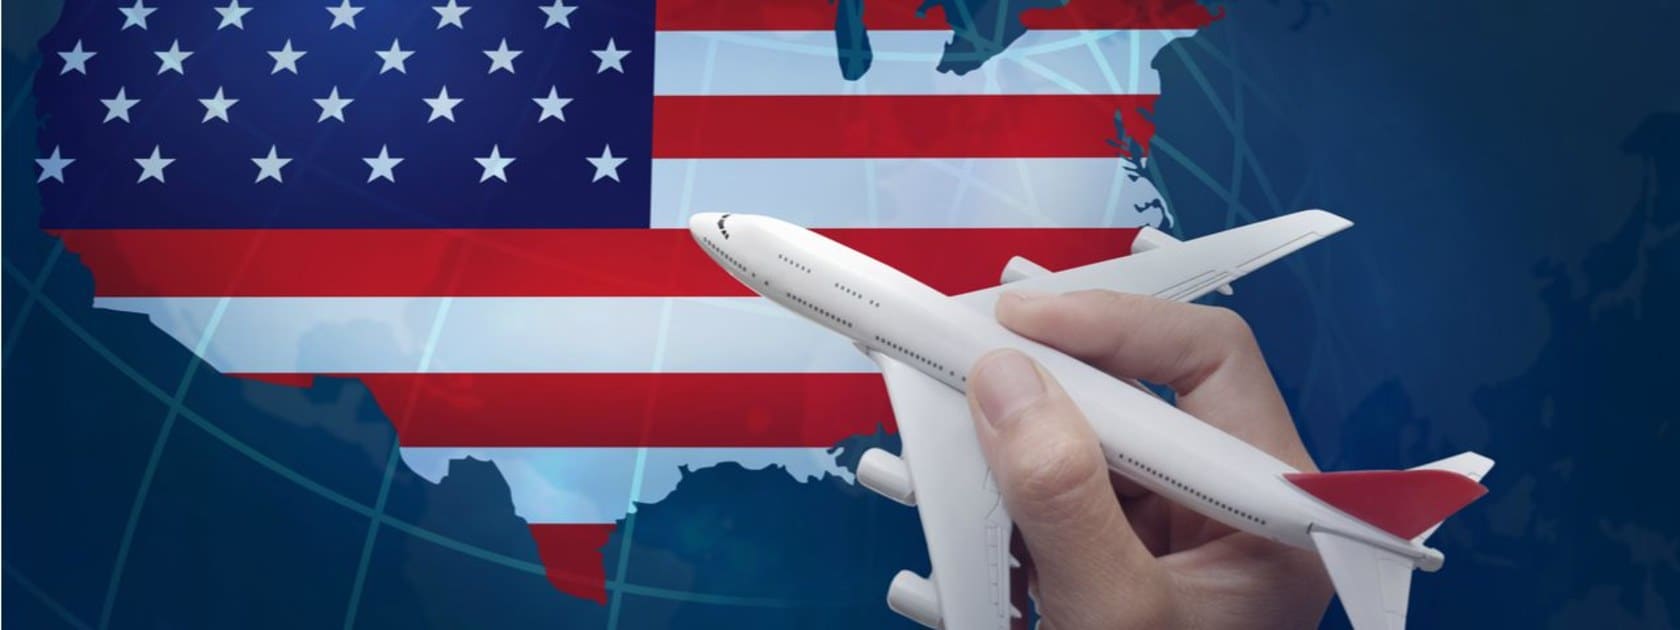  A hand holding a toy airplane over a map of the USA